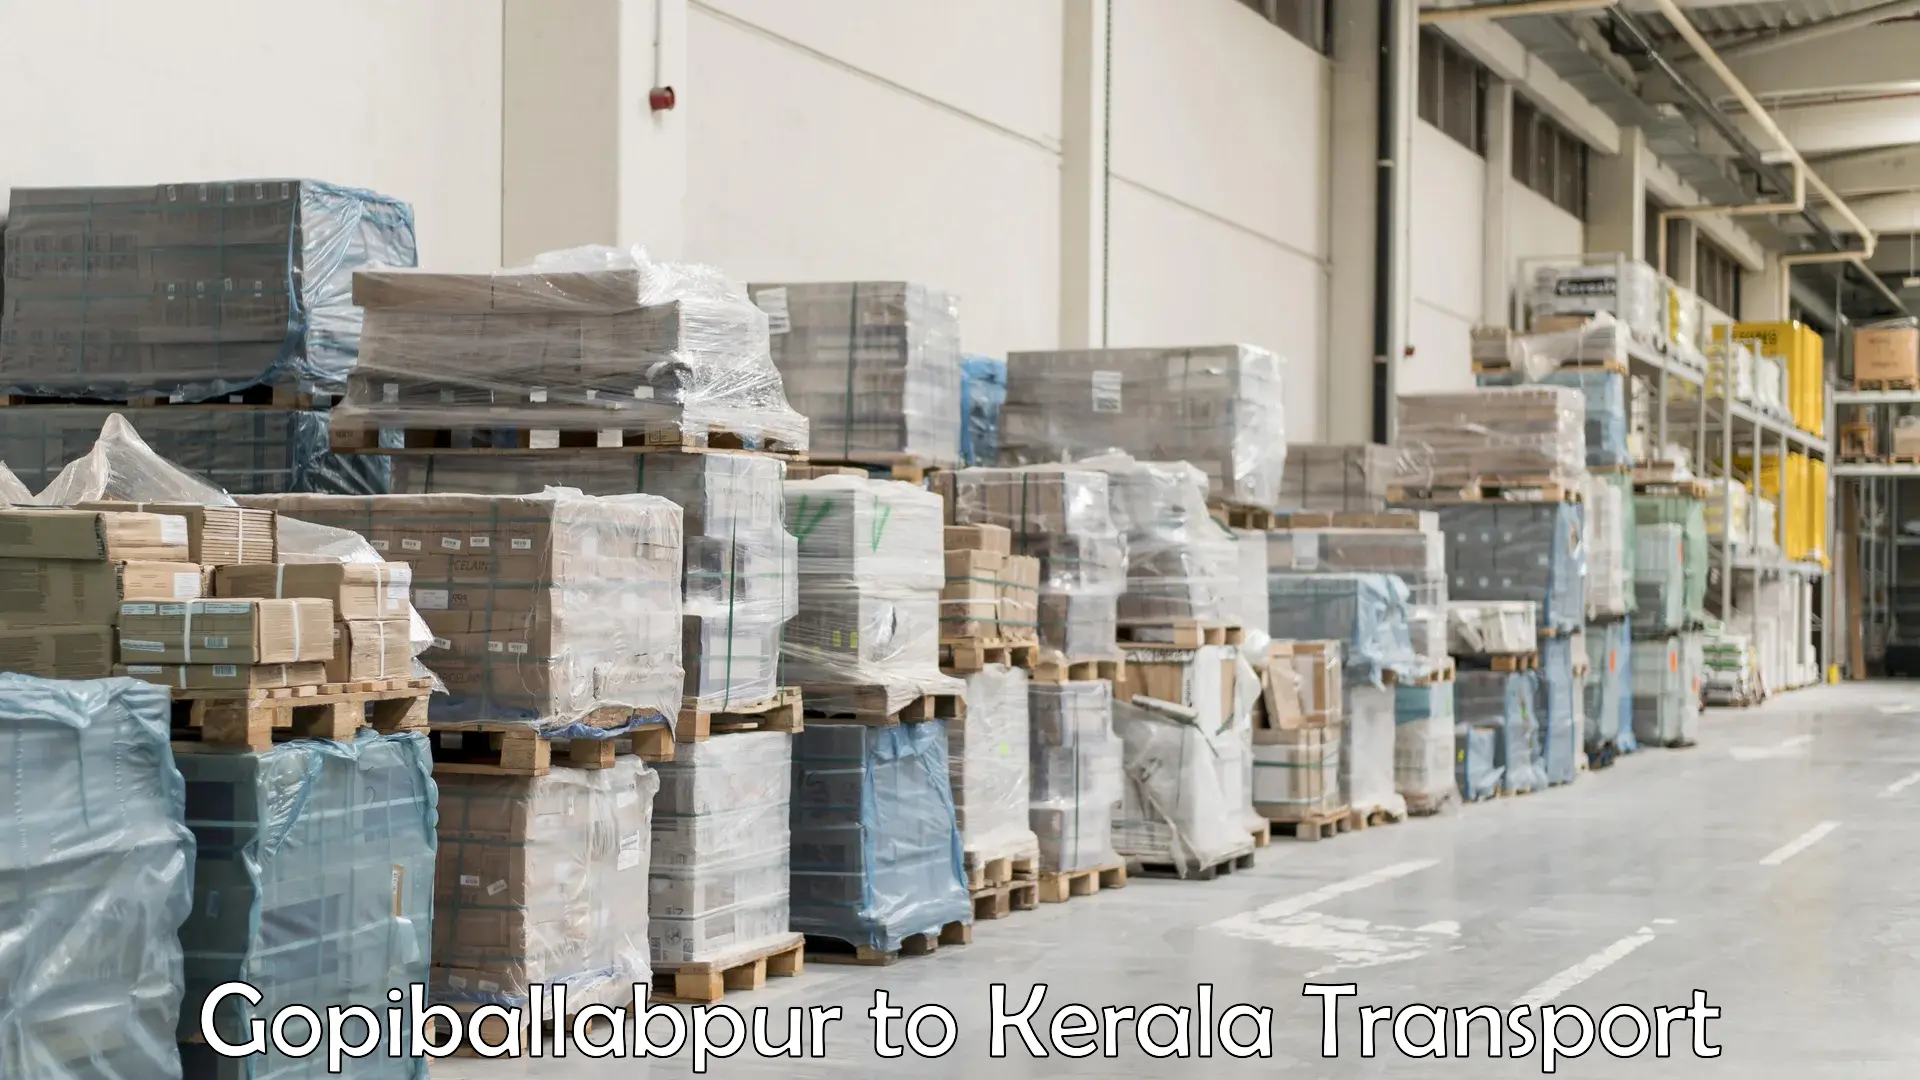 Container transport service in Gopiballabpur to Vaduvanchal